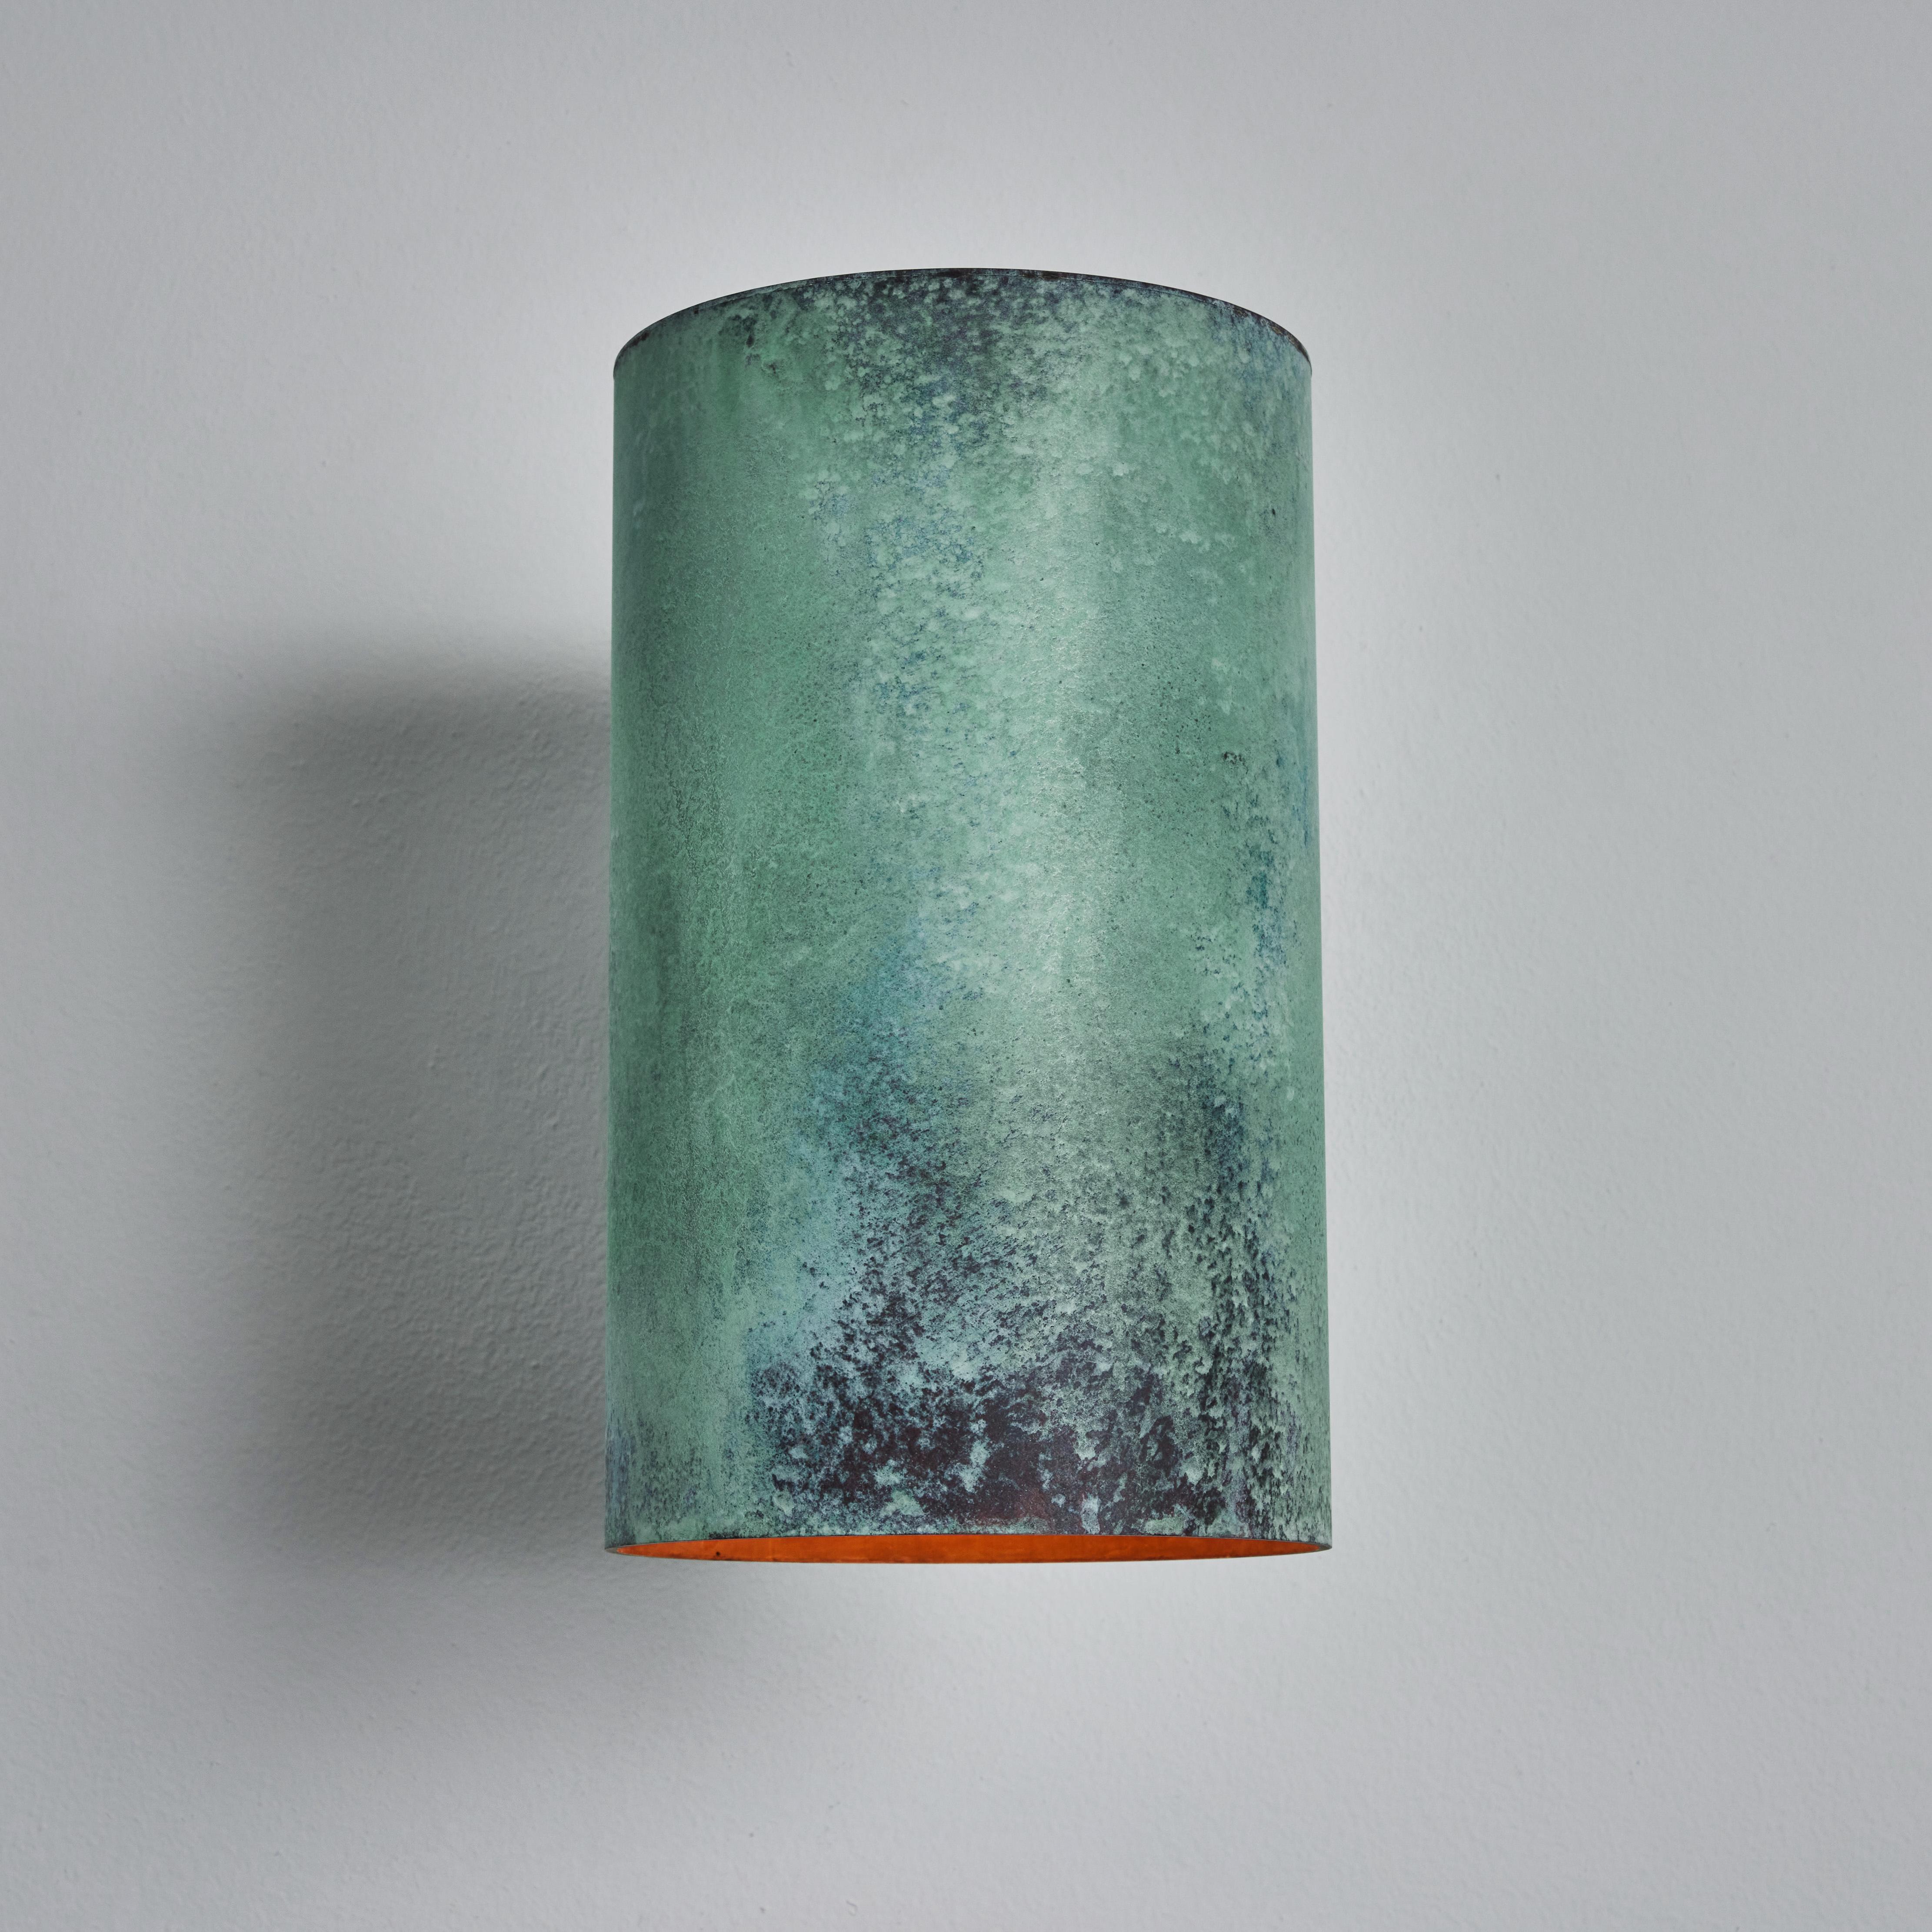 Large Hans-Agne Jakobsson C 627 'Rulle' verdigris patinated sconce. An exclusive made for U.S. and UL listed authorized re-edition of the classic Swedish design executed in richly patinated metal with raw unlacquered metal interior that will